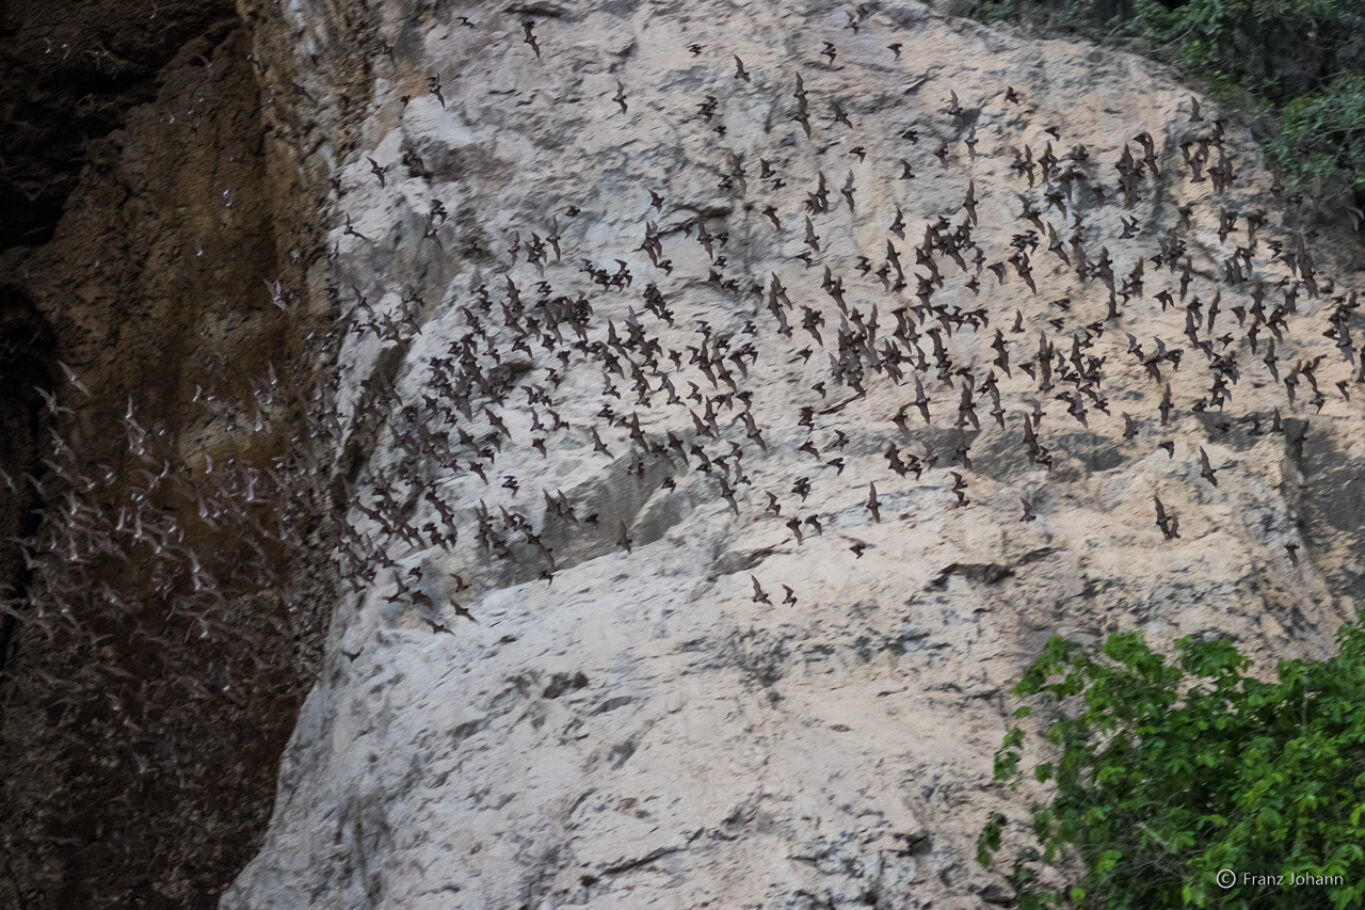 Wrinkle-lipped bats take off into the night; Cambodia